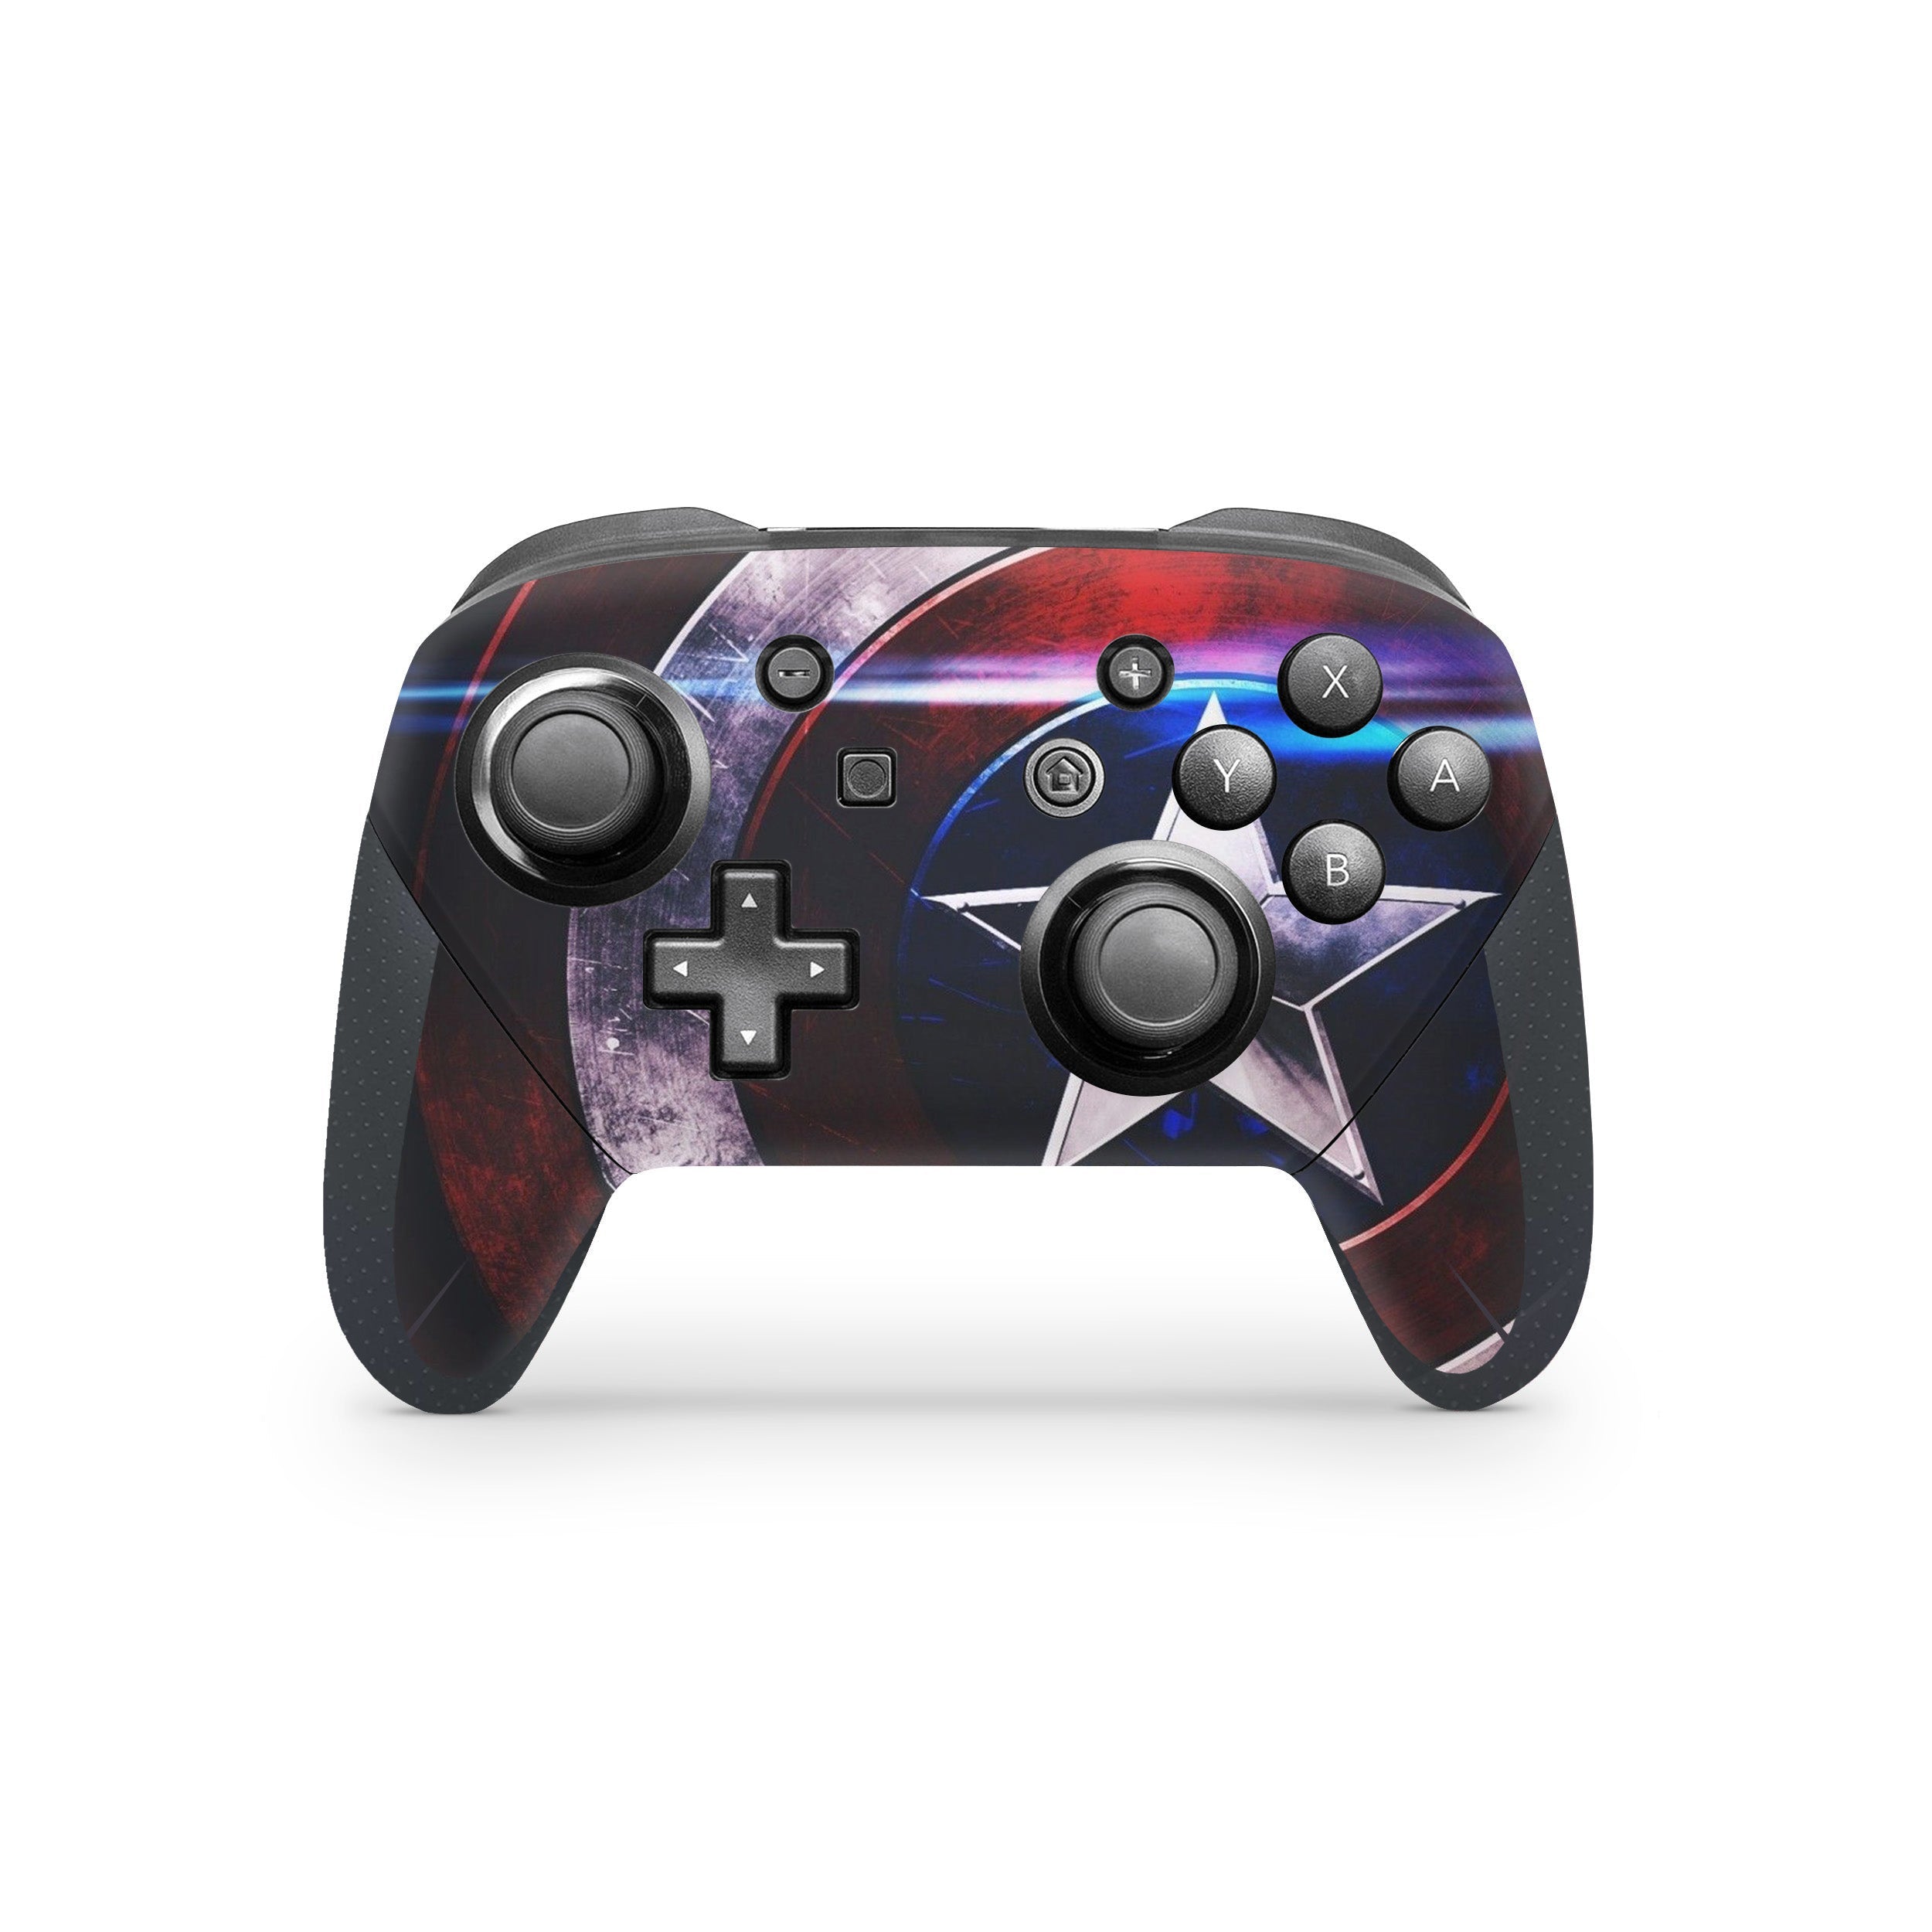 A video game skin featuring a Marvel Captain America design for the Switch Pro Controller.